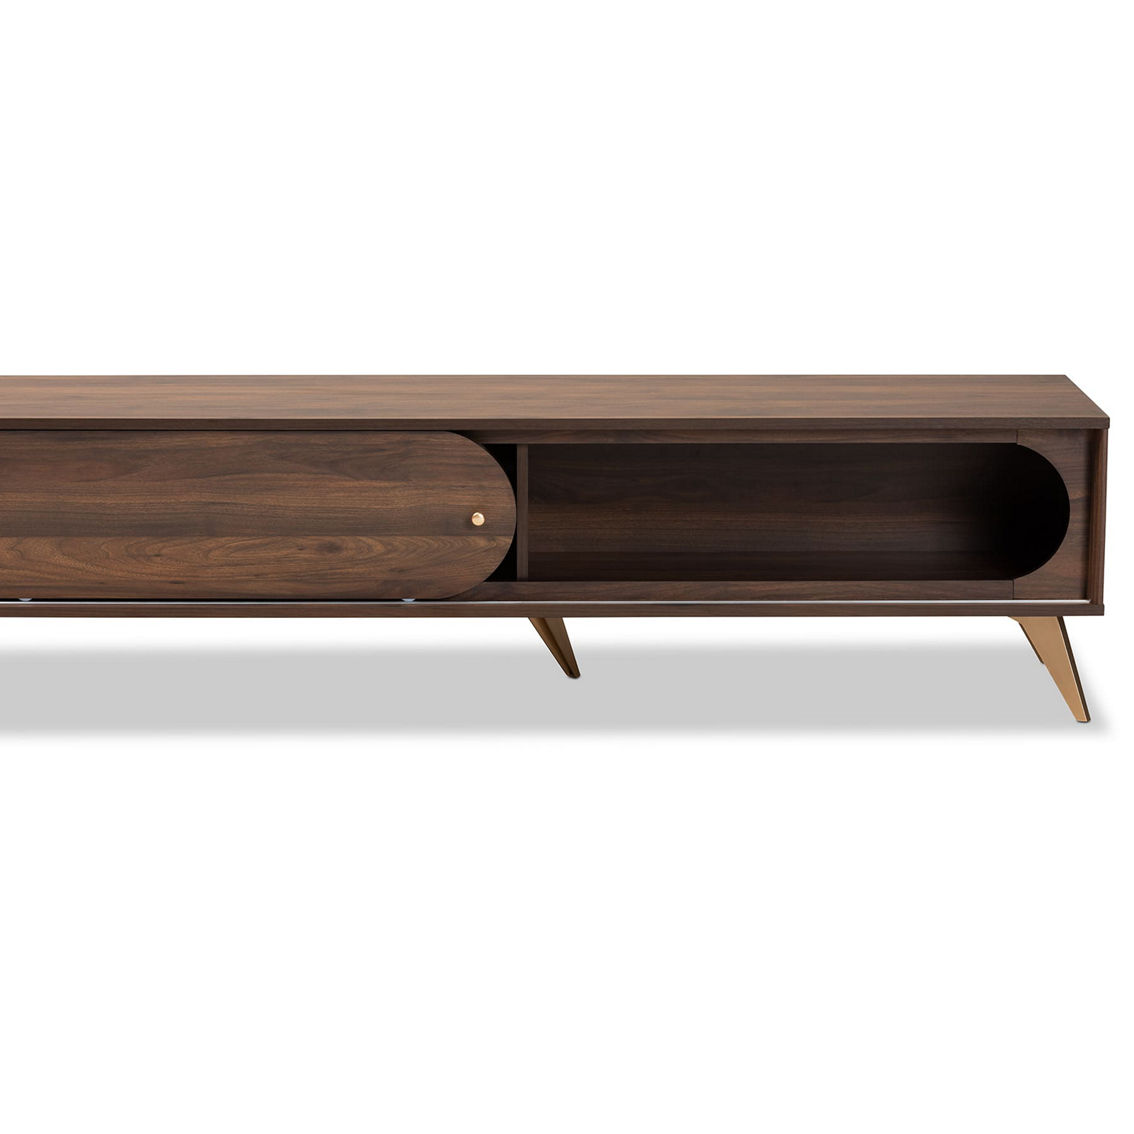 Baxton Studio Dena Walnut Brown Wood and Gold Finished TV Stand - Image 3 of 5